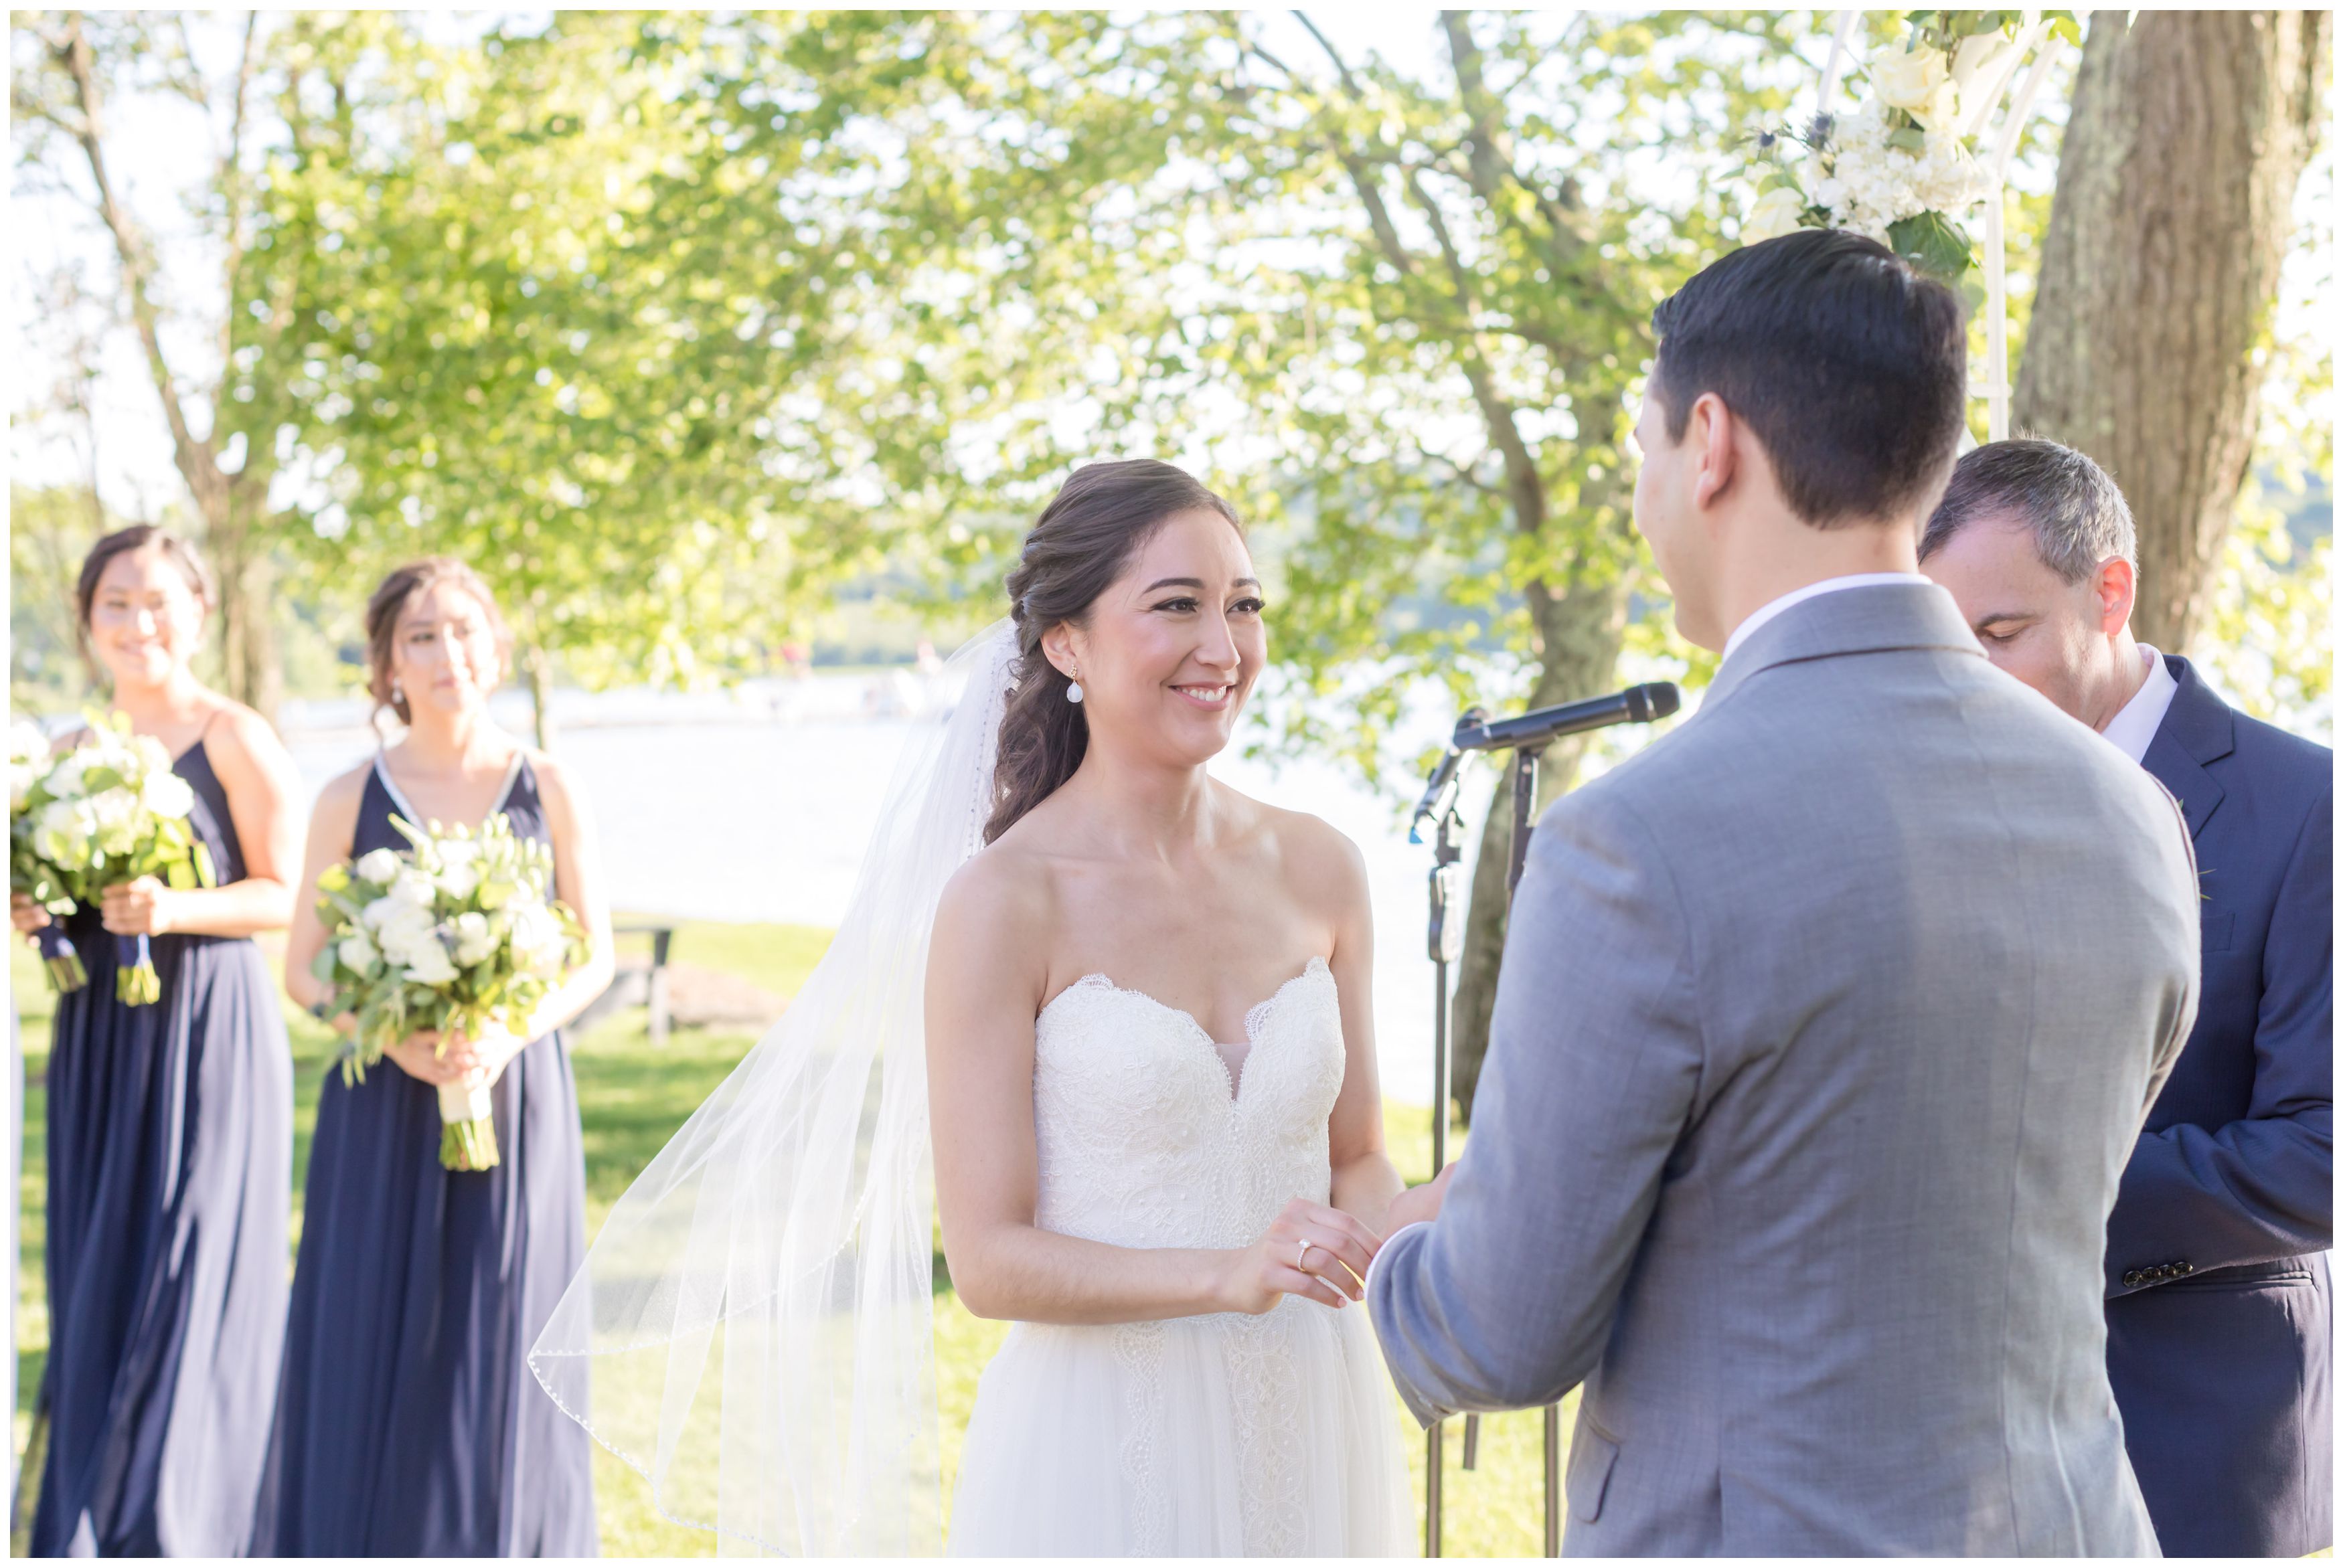 Bride saying vows at outdoor lakeside ceremony